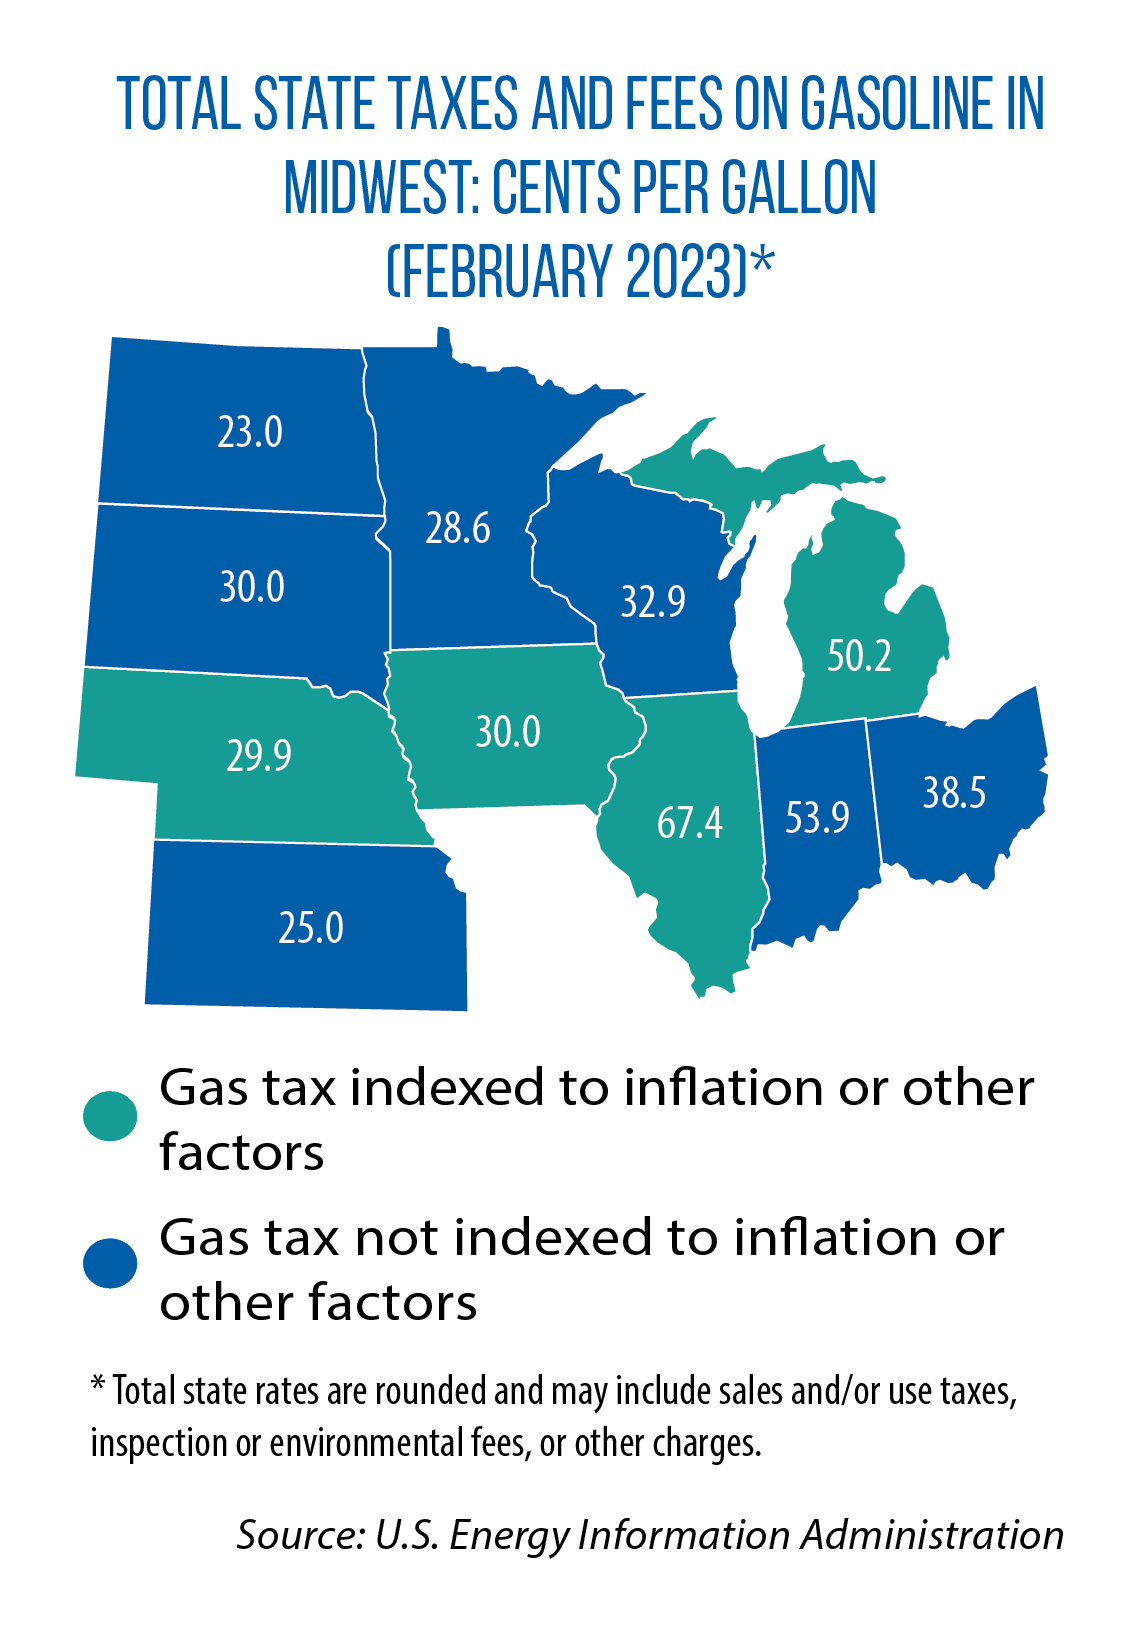 Map of total state taxes, fees (in cents/gallon) on gasoline in Midwestern states as of February 2023.